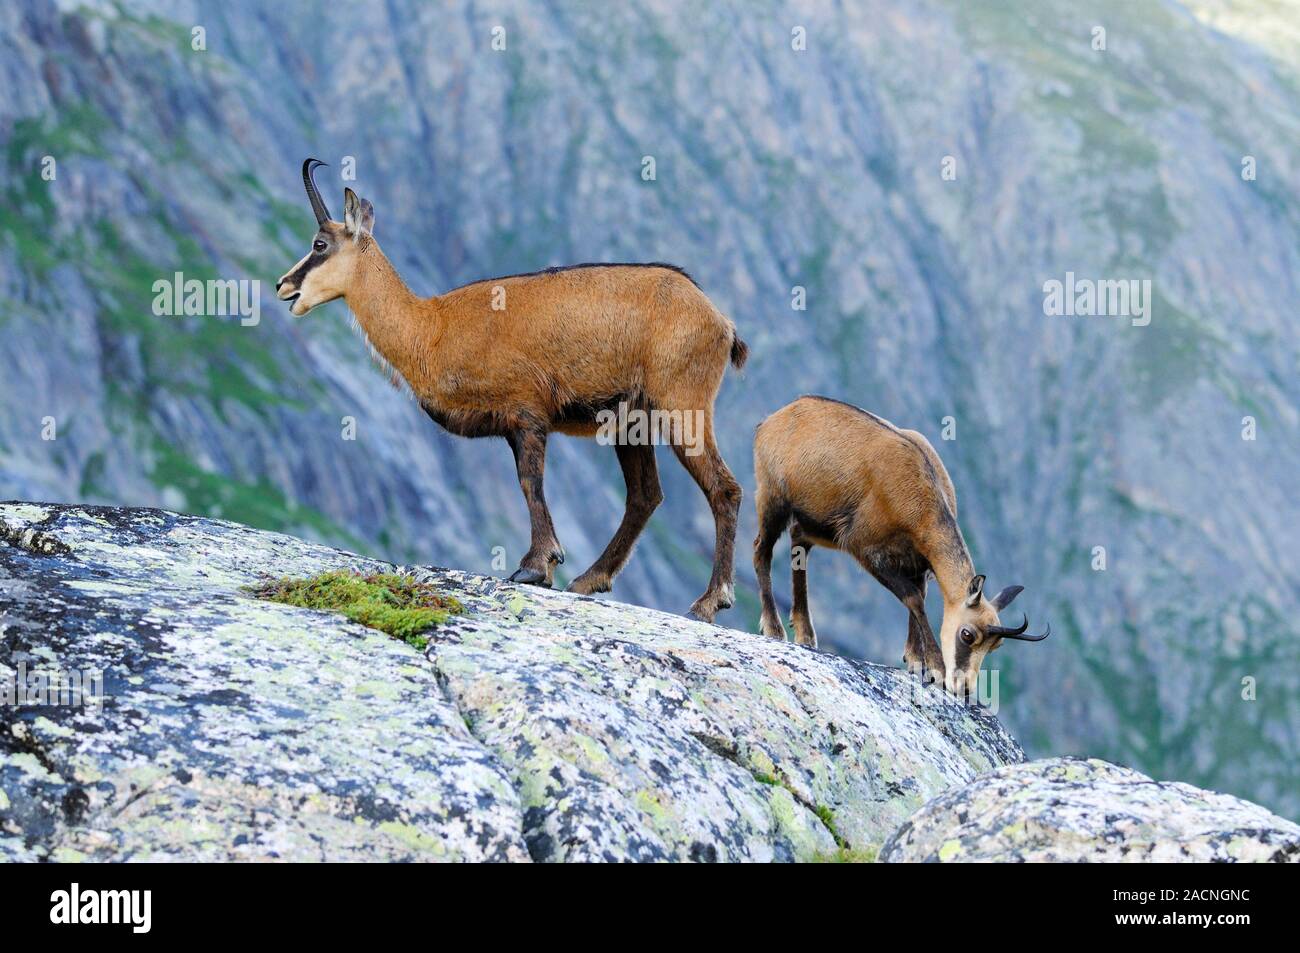 Chamois (Rupicapra rupicapra). This goat-like animal inhabits mountainous regions and is an excellent climber. Both males and females have short horns Stock Photo